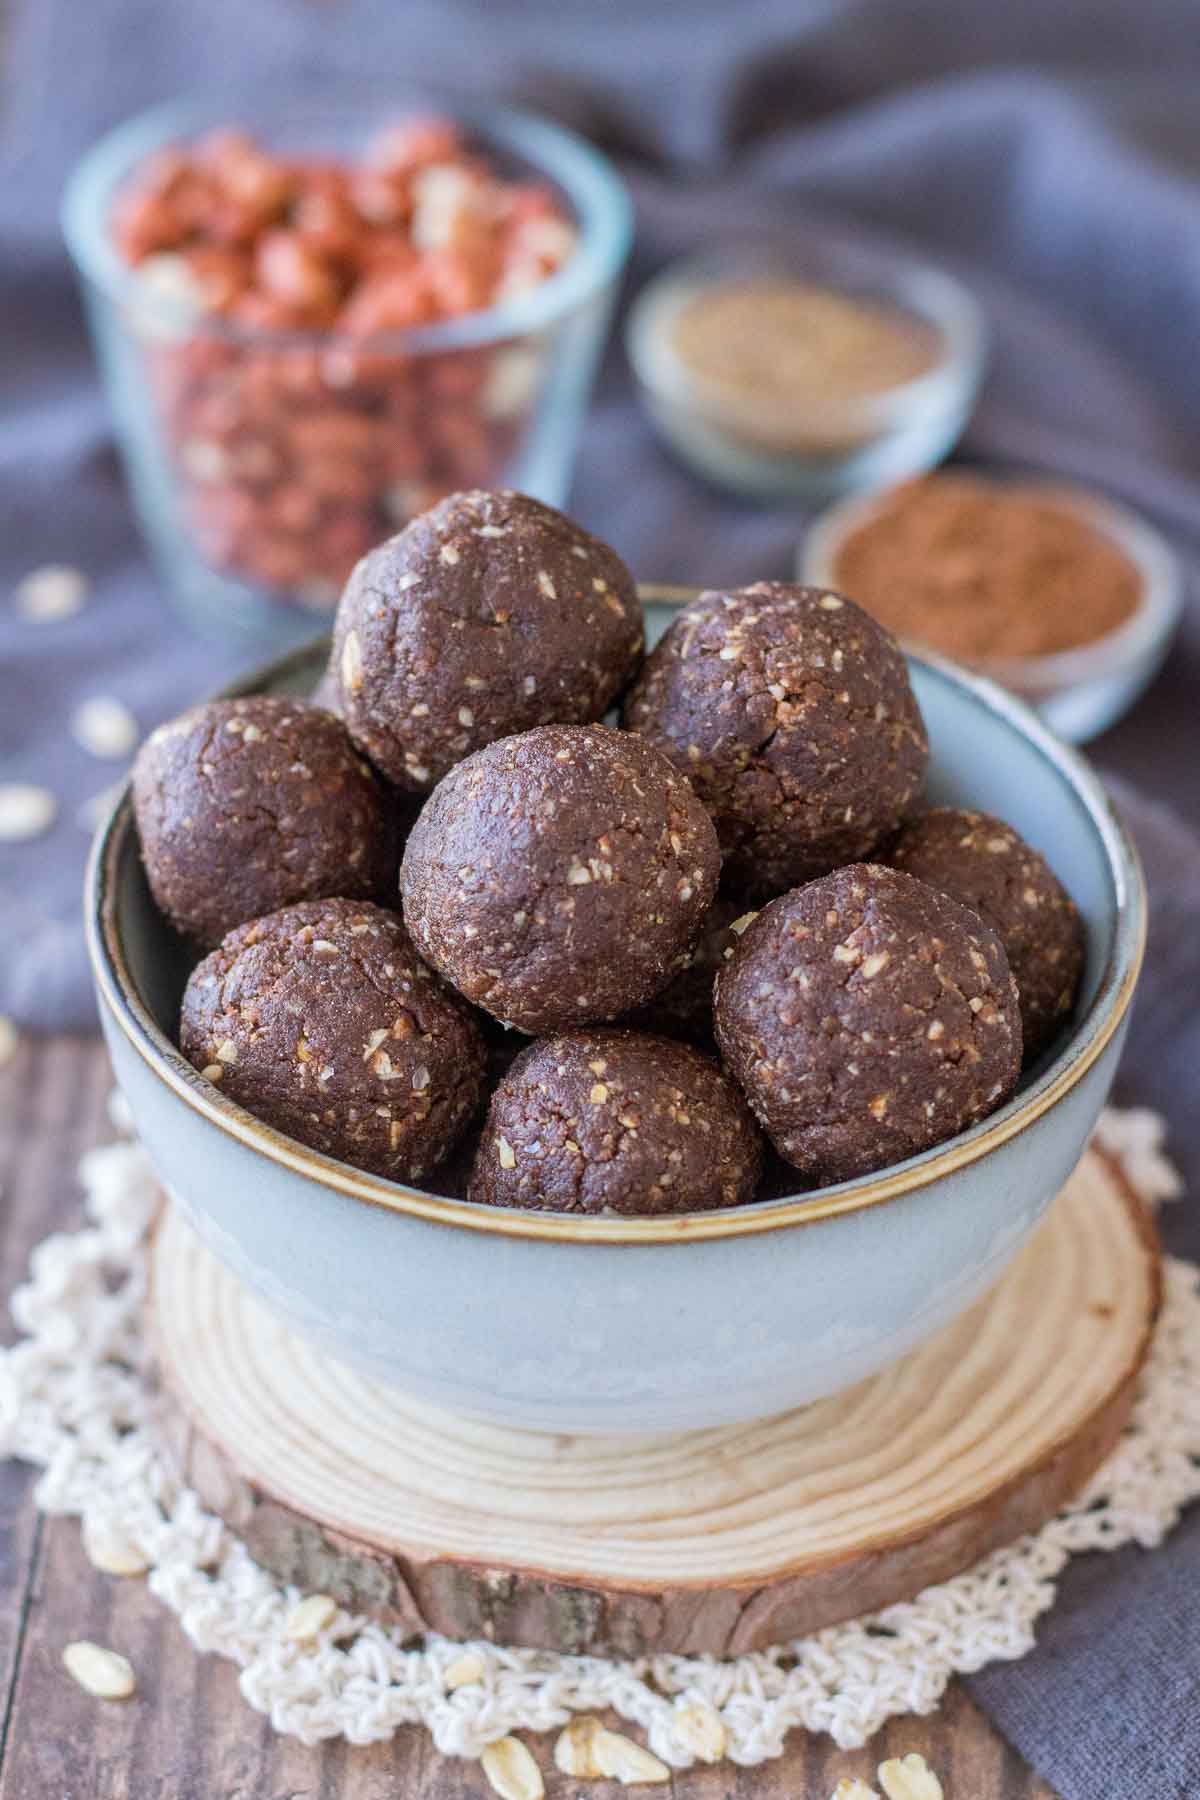 Chocolate protein balls served in a small bowl, spices and raw peanuts in a background